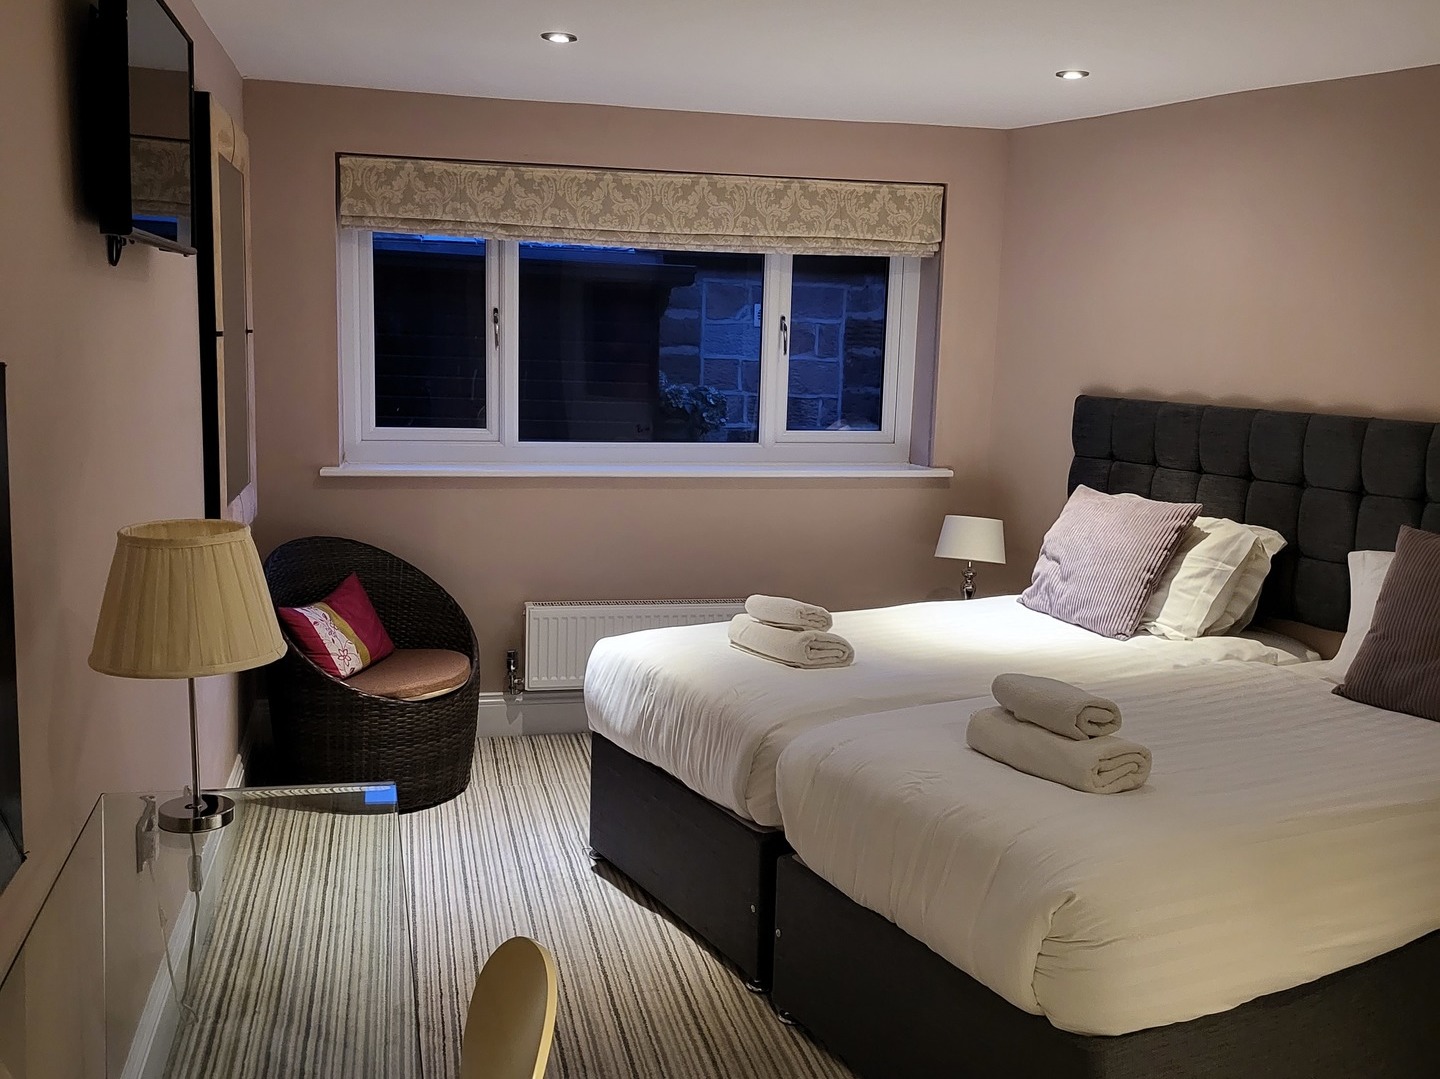 Luxury two bedroom apartments to rent in Harrogate town centre north yorkshire hotel alternative